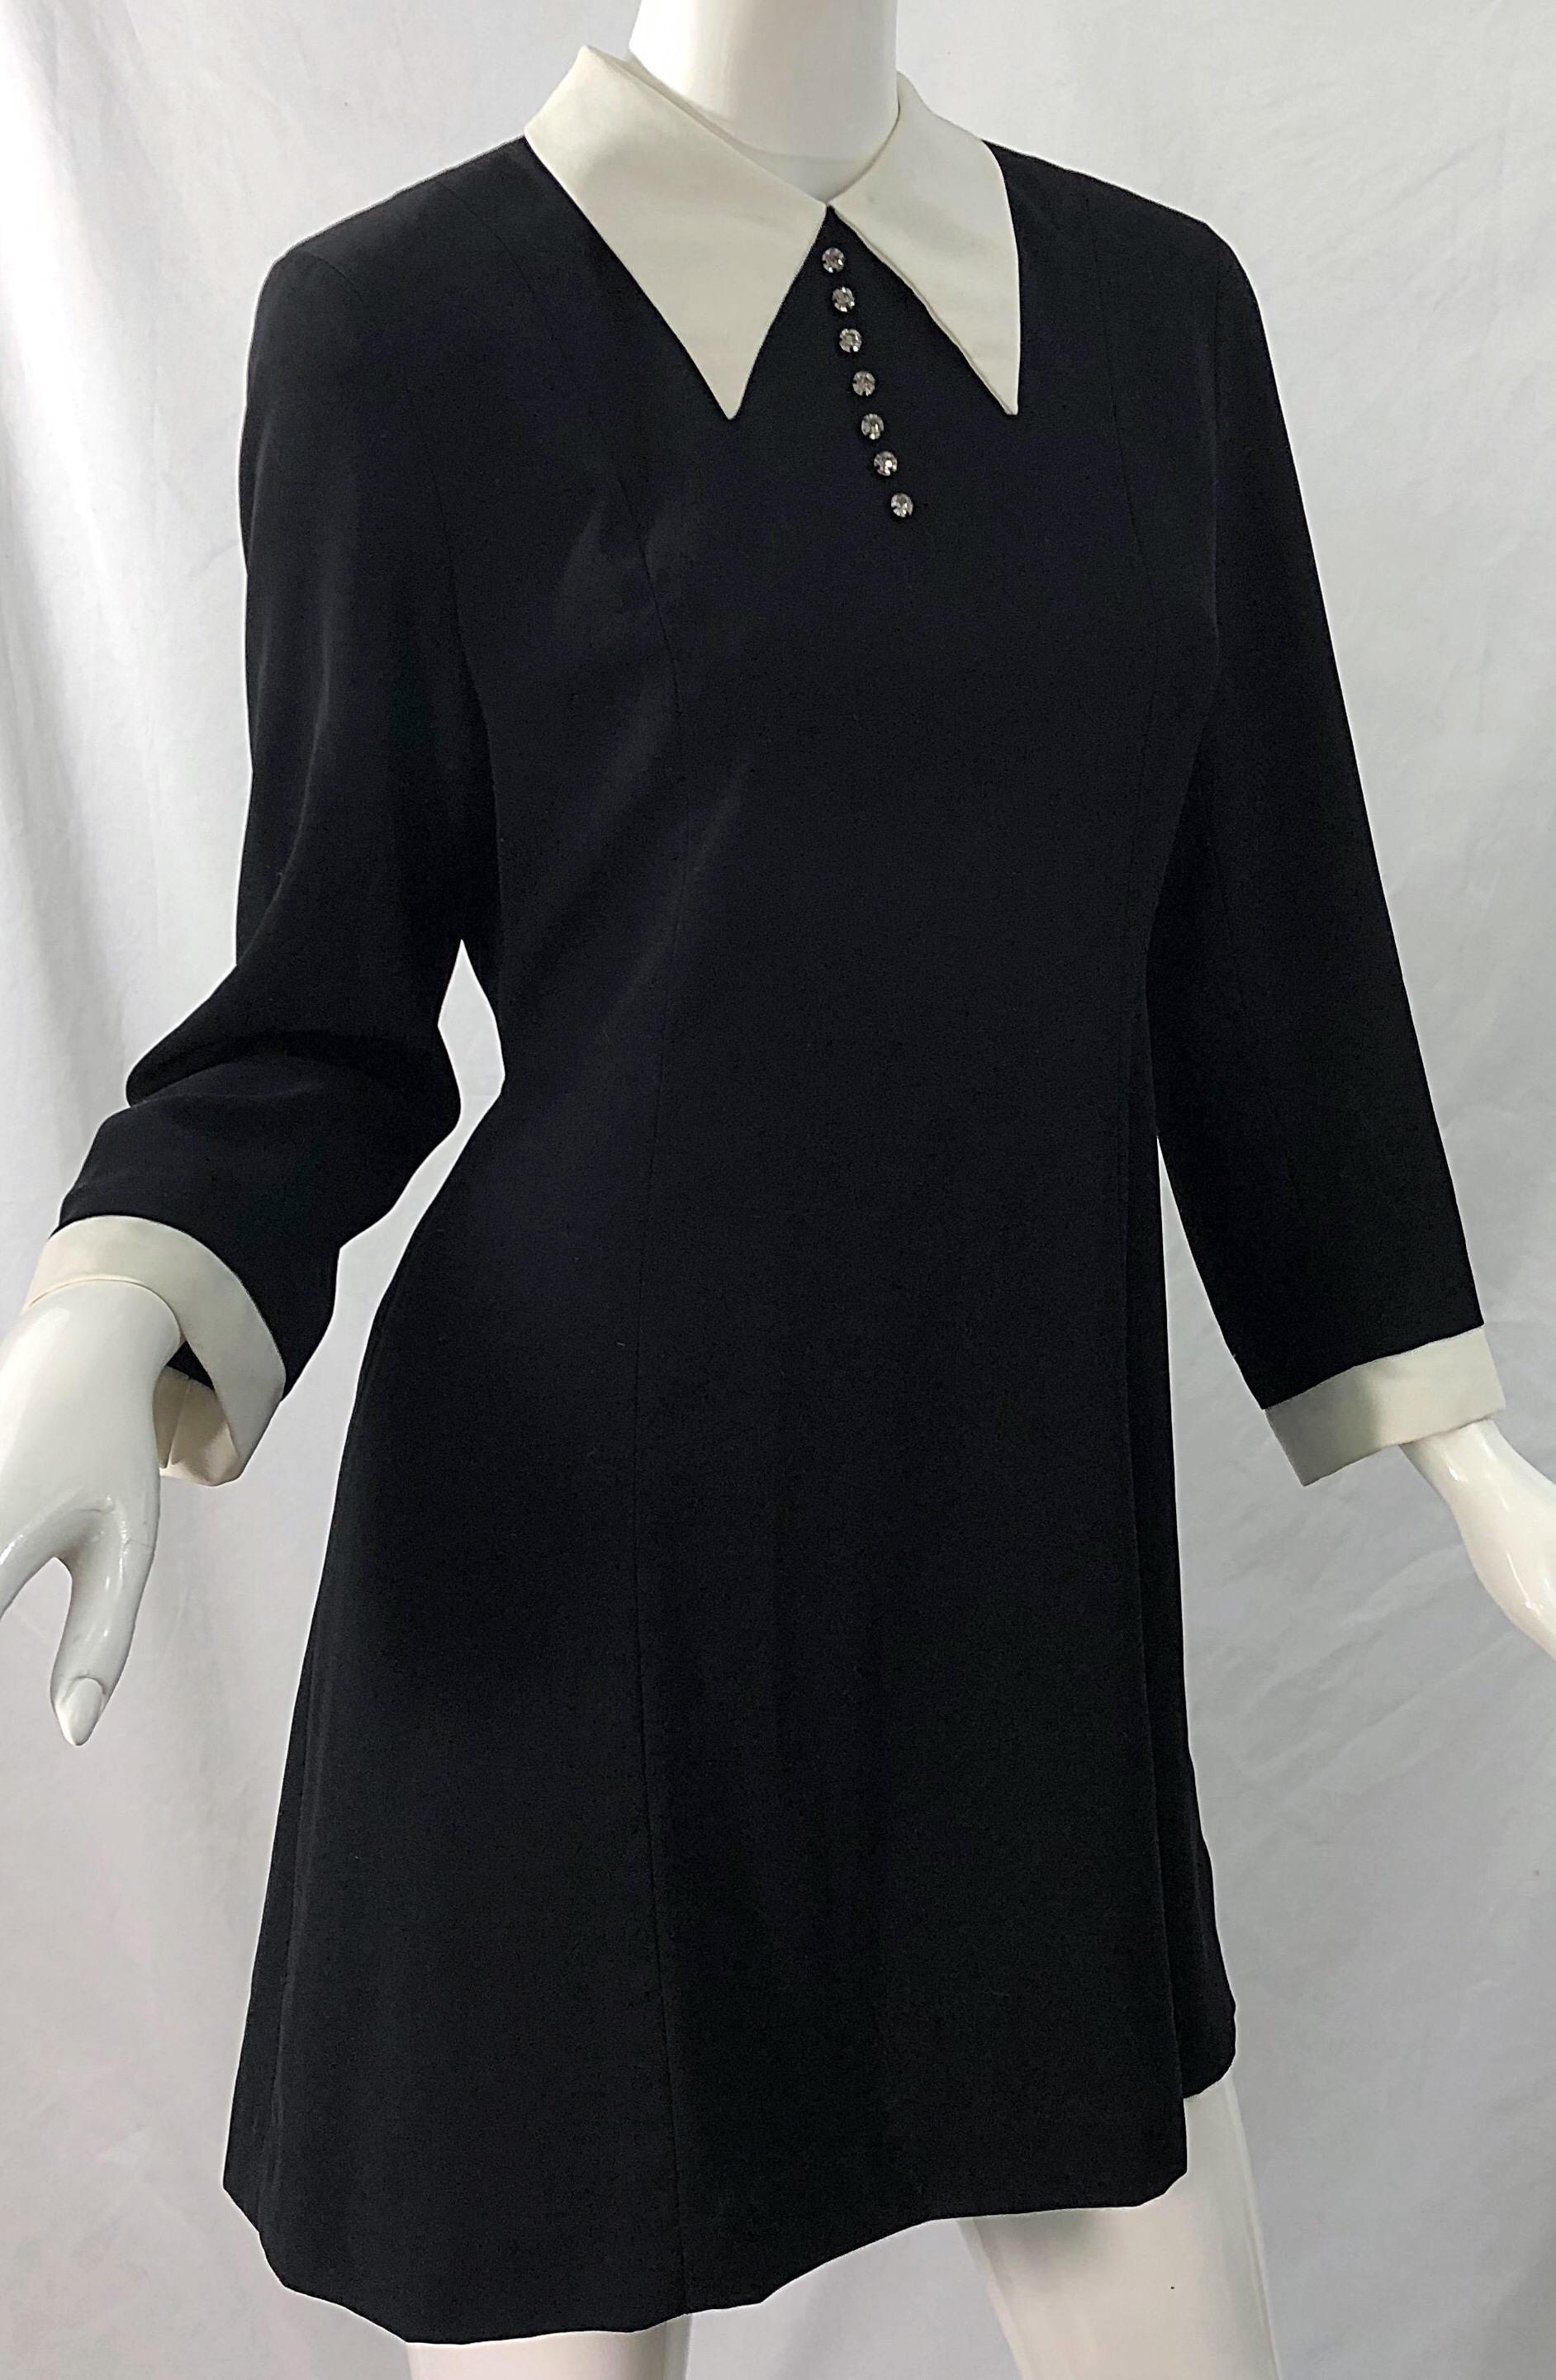 Women's Vintage Givenchy 1990s Black and White Rhinestone Long Sleeve 90s Mini Dress For Sale